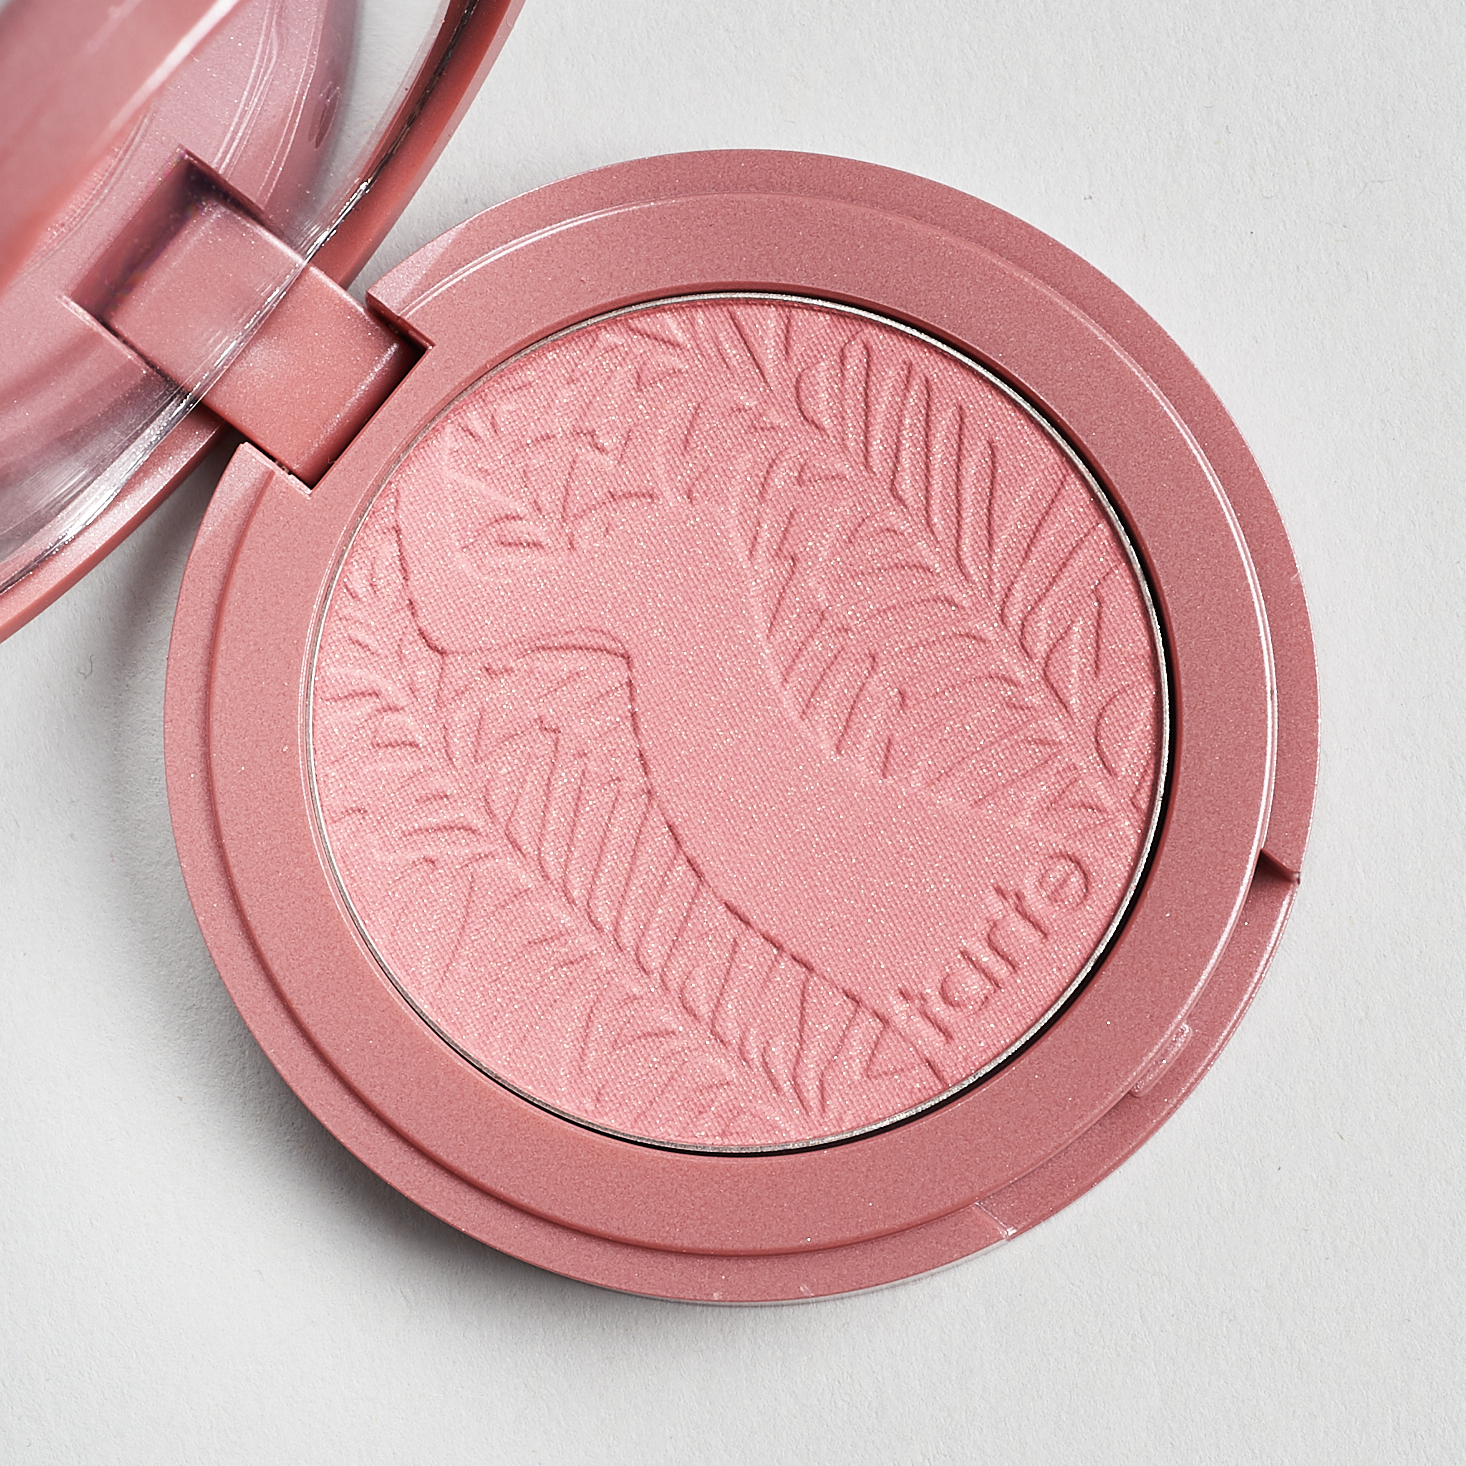 open tarte Amazonian Clay 12-hour Blush in Dazzled compact